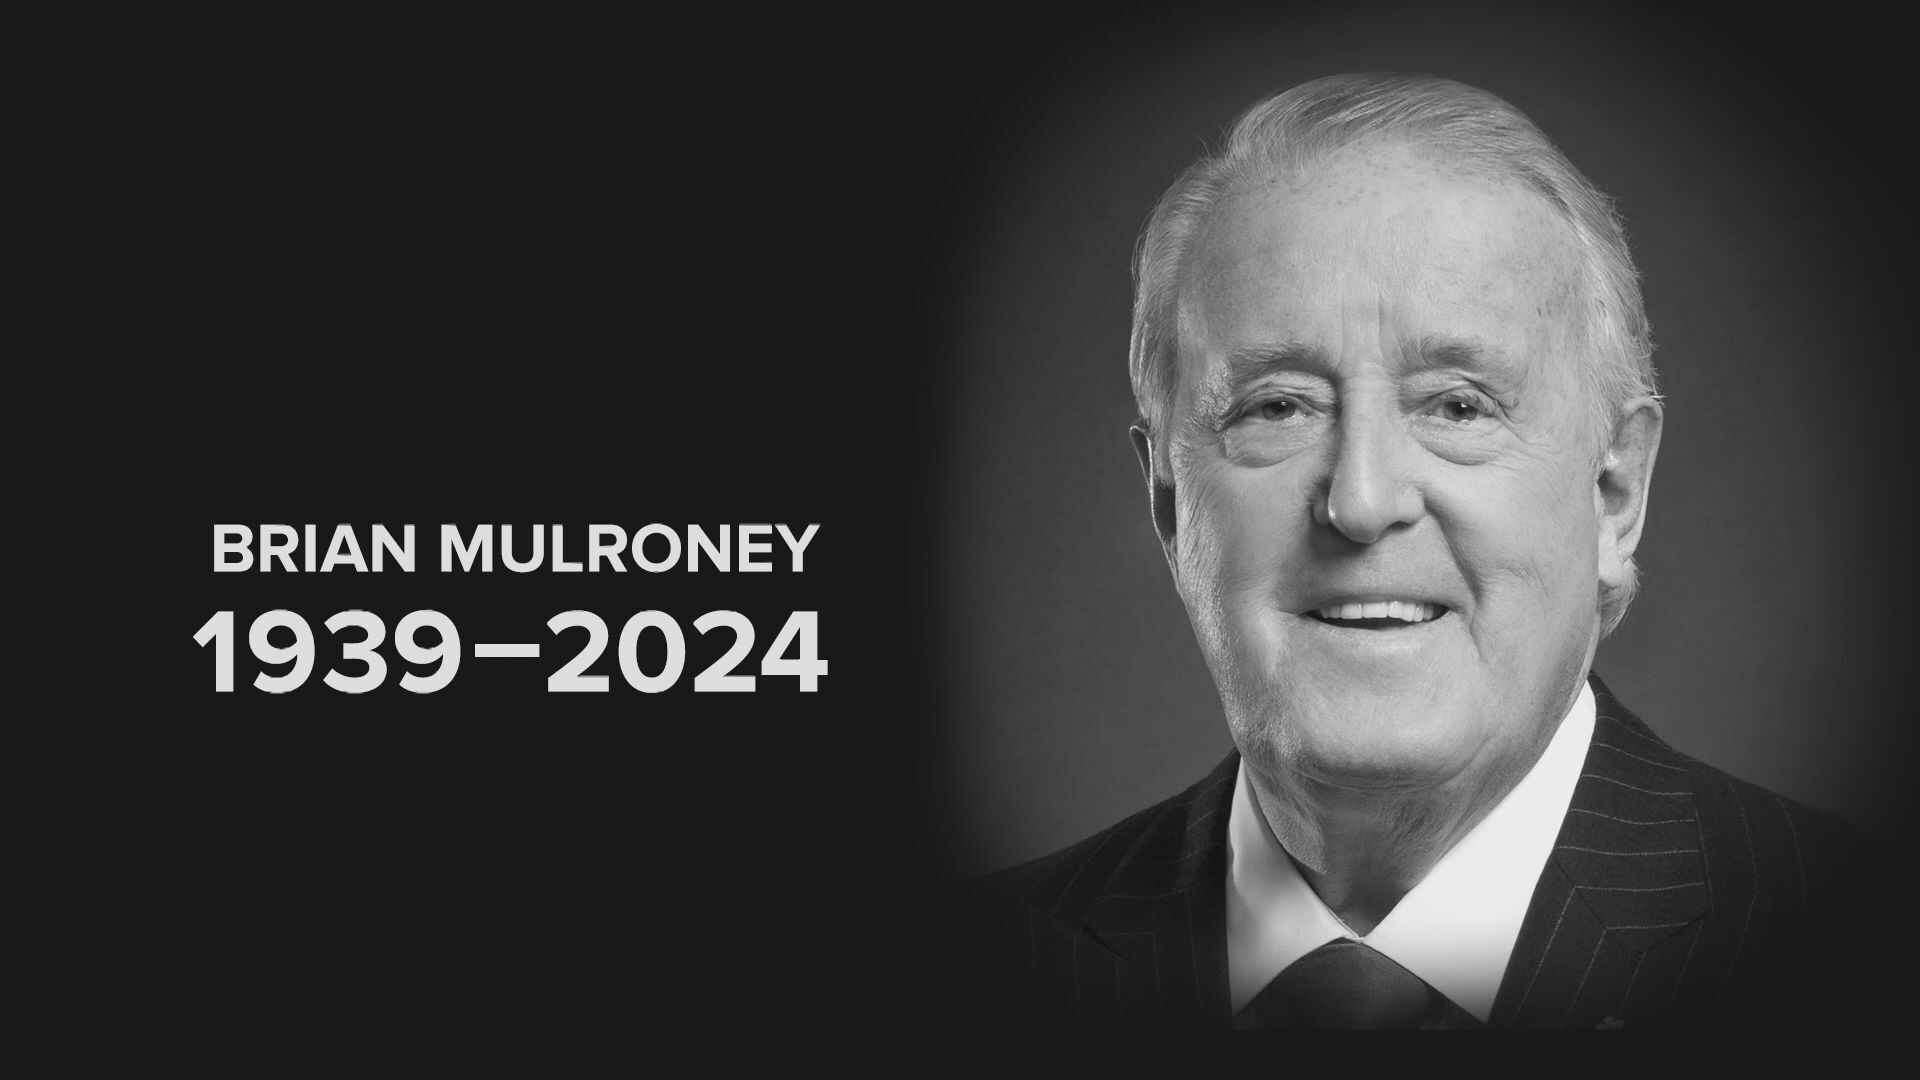 Politicians from the past and present pay tribute to Brian Mulroney